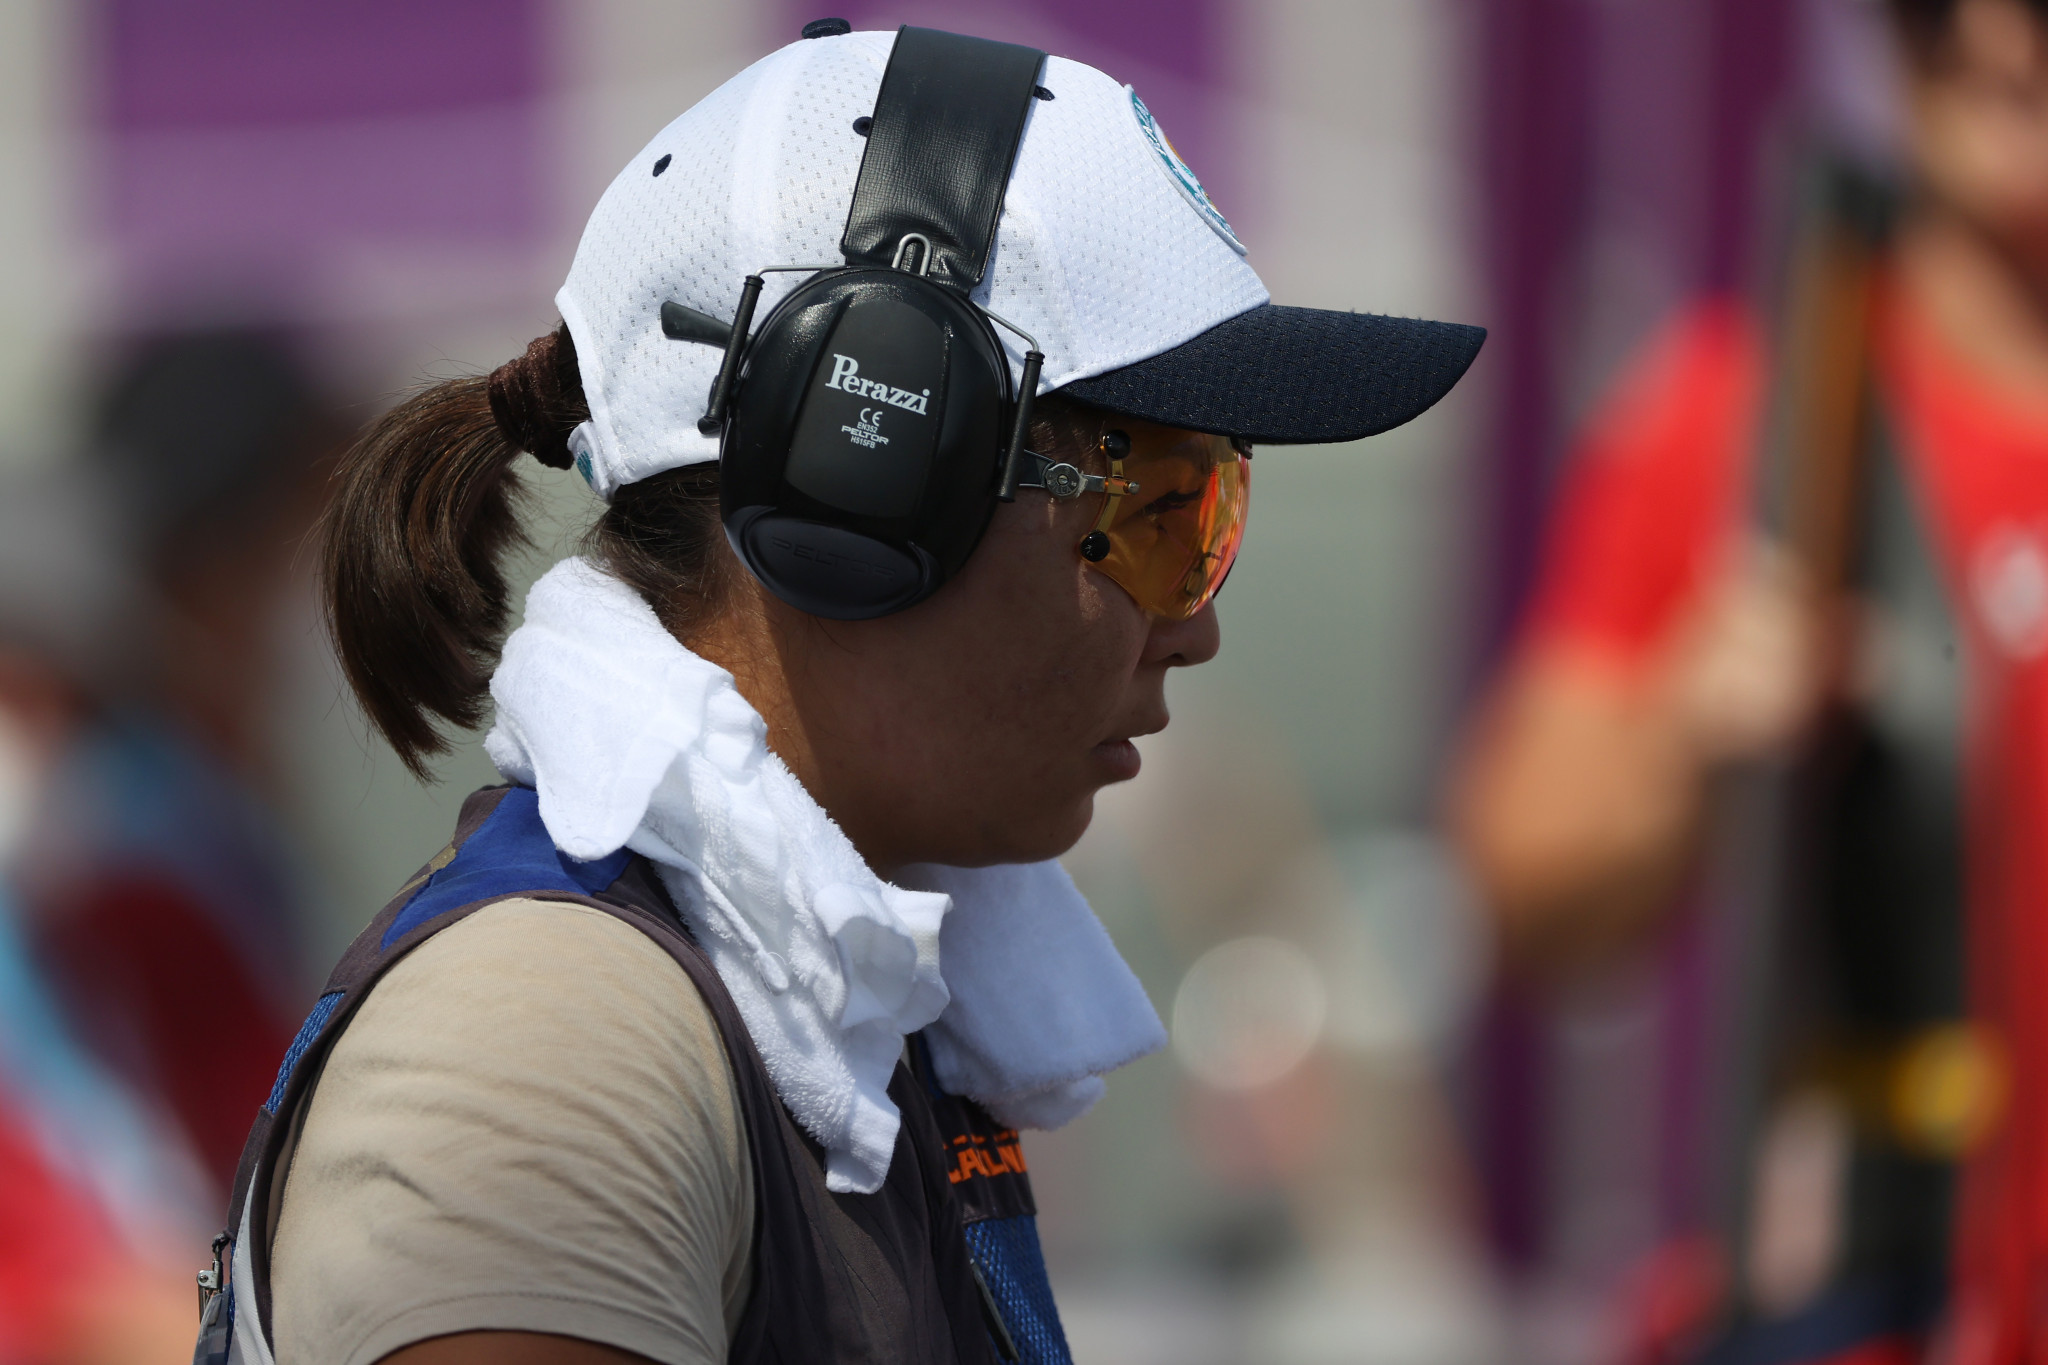 Double success for hosts Kazakhstan at ISSF World Cup Shotgun in Almaty